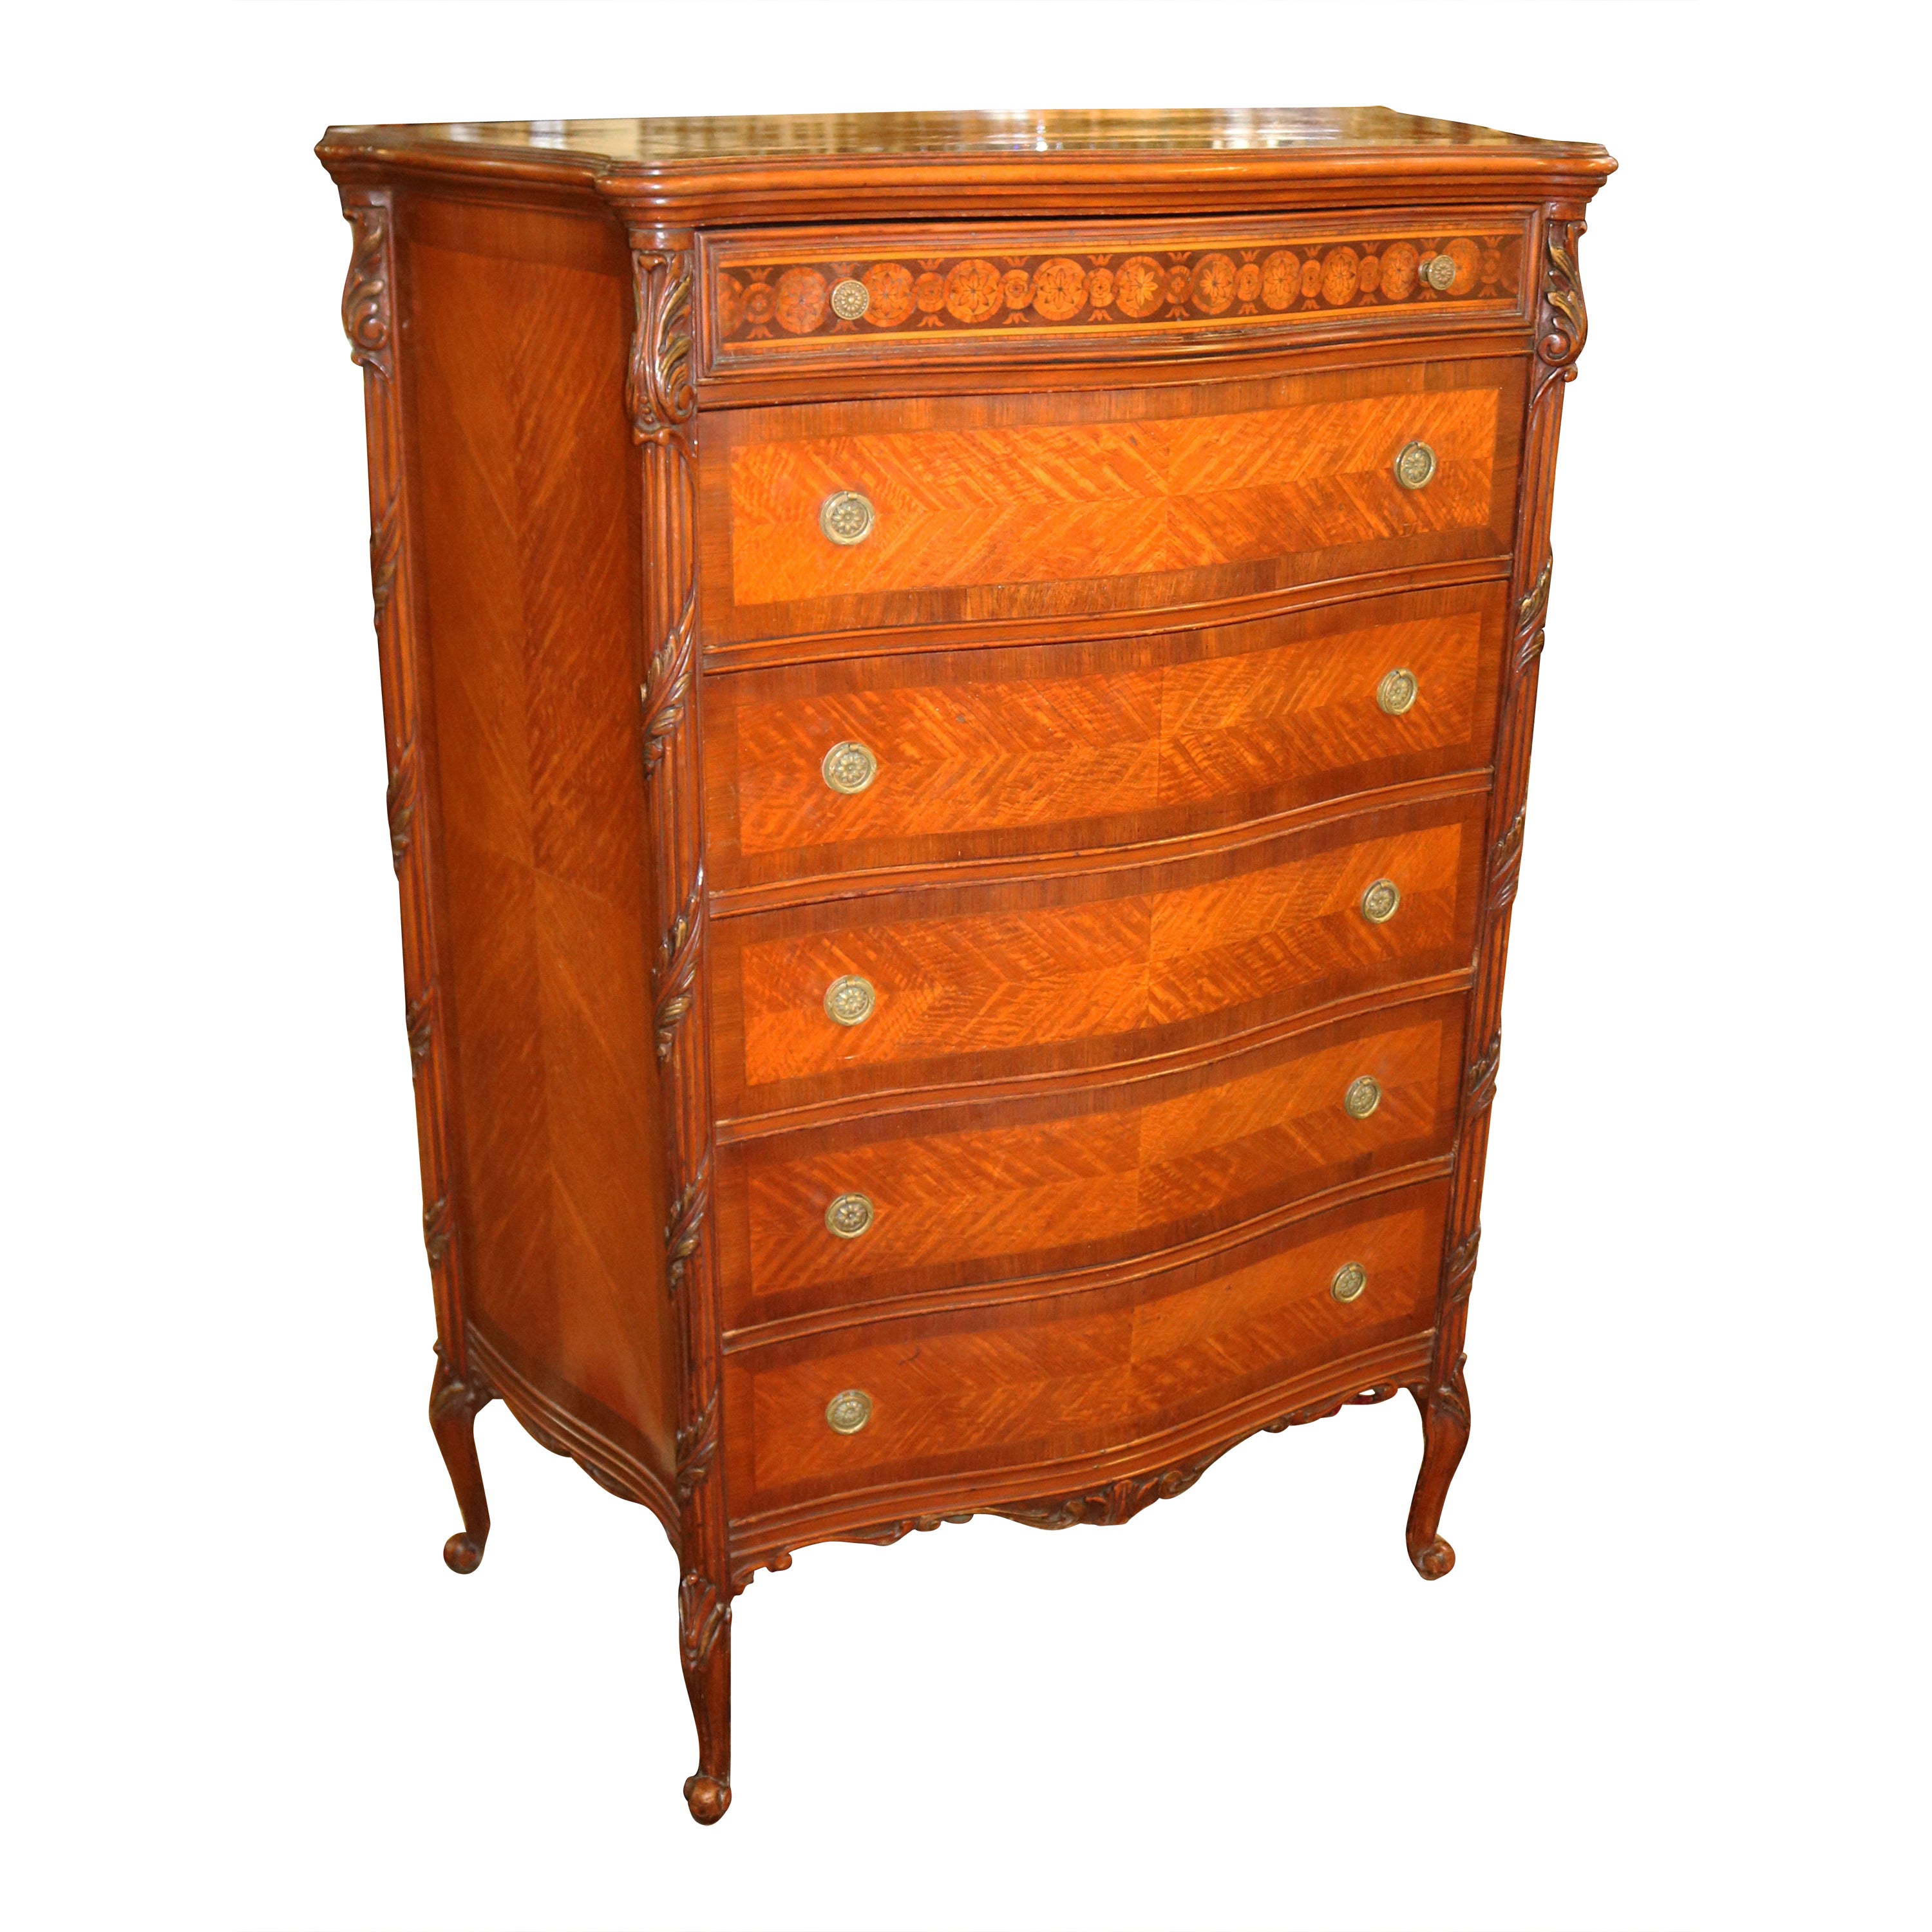 Fabulous French Louis XV Style Inlaid Kingwood High Chest Dresser For Sale